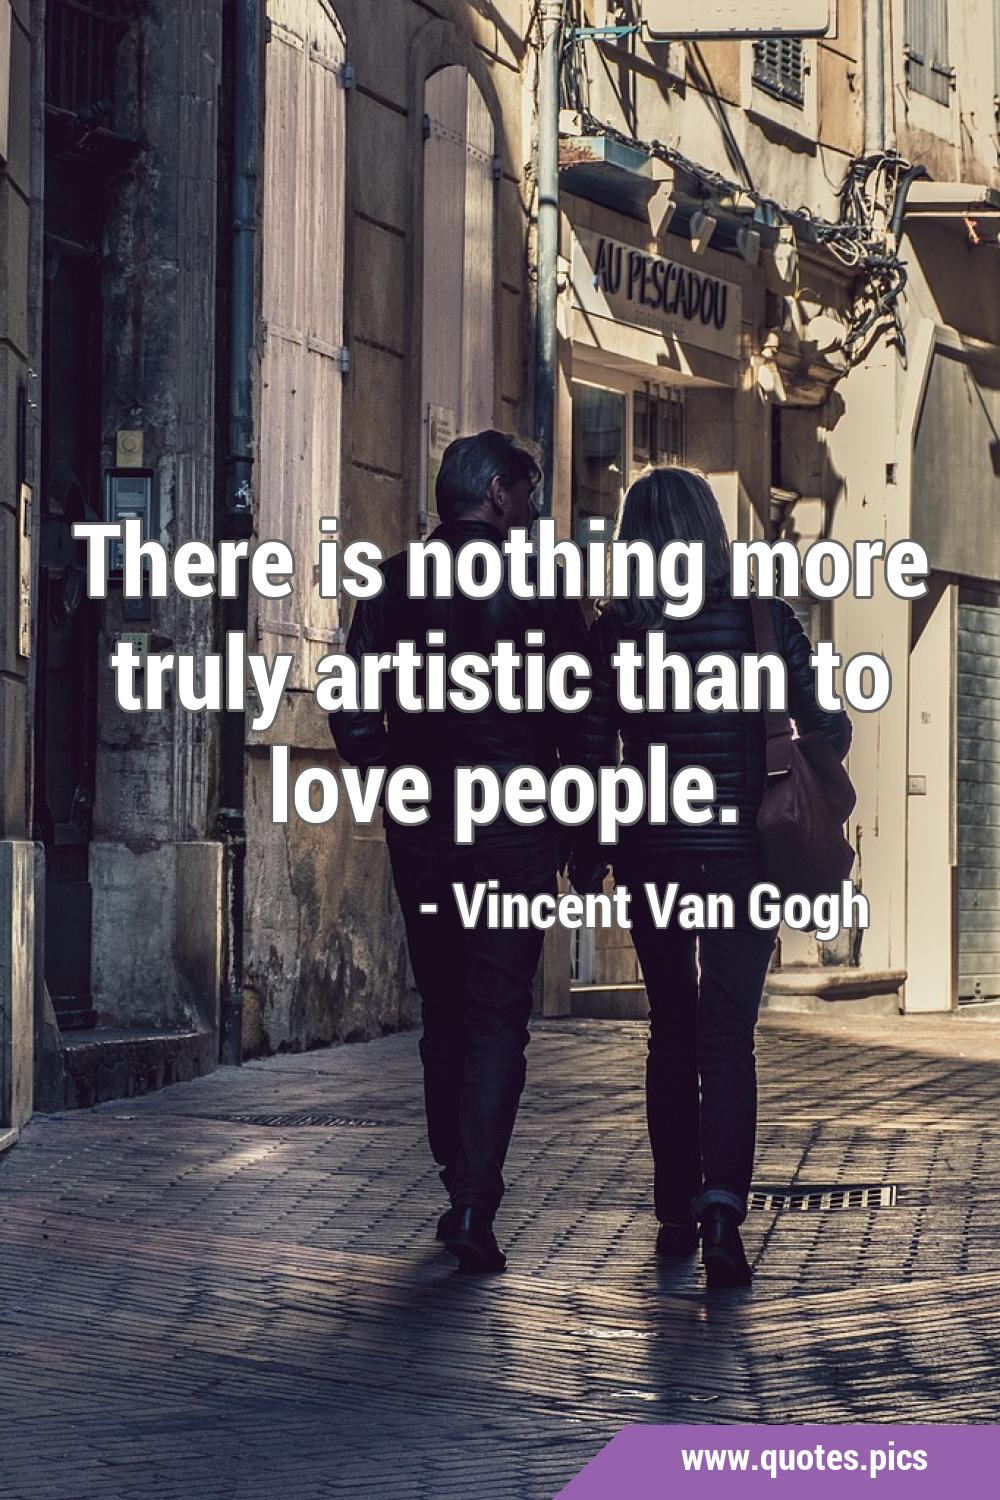 There is nothing more truly artistic than to love people